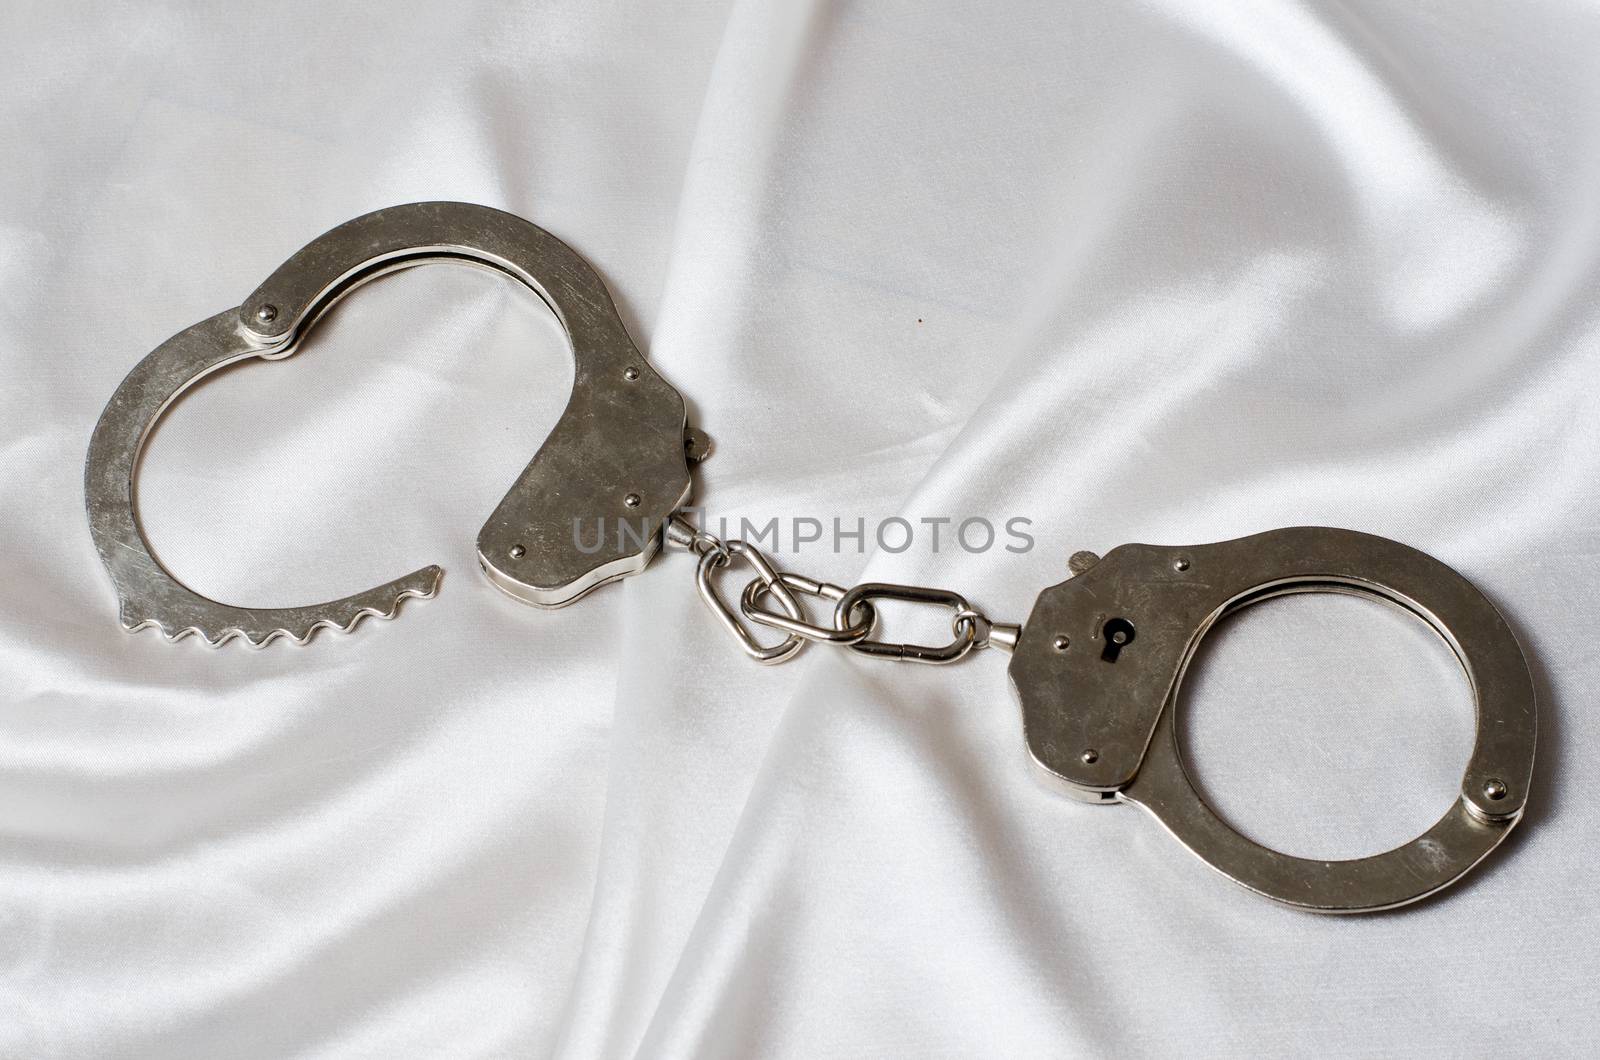 handcuffs on the satin background